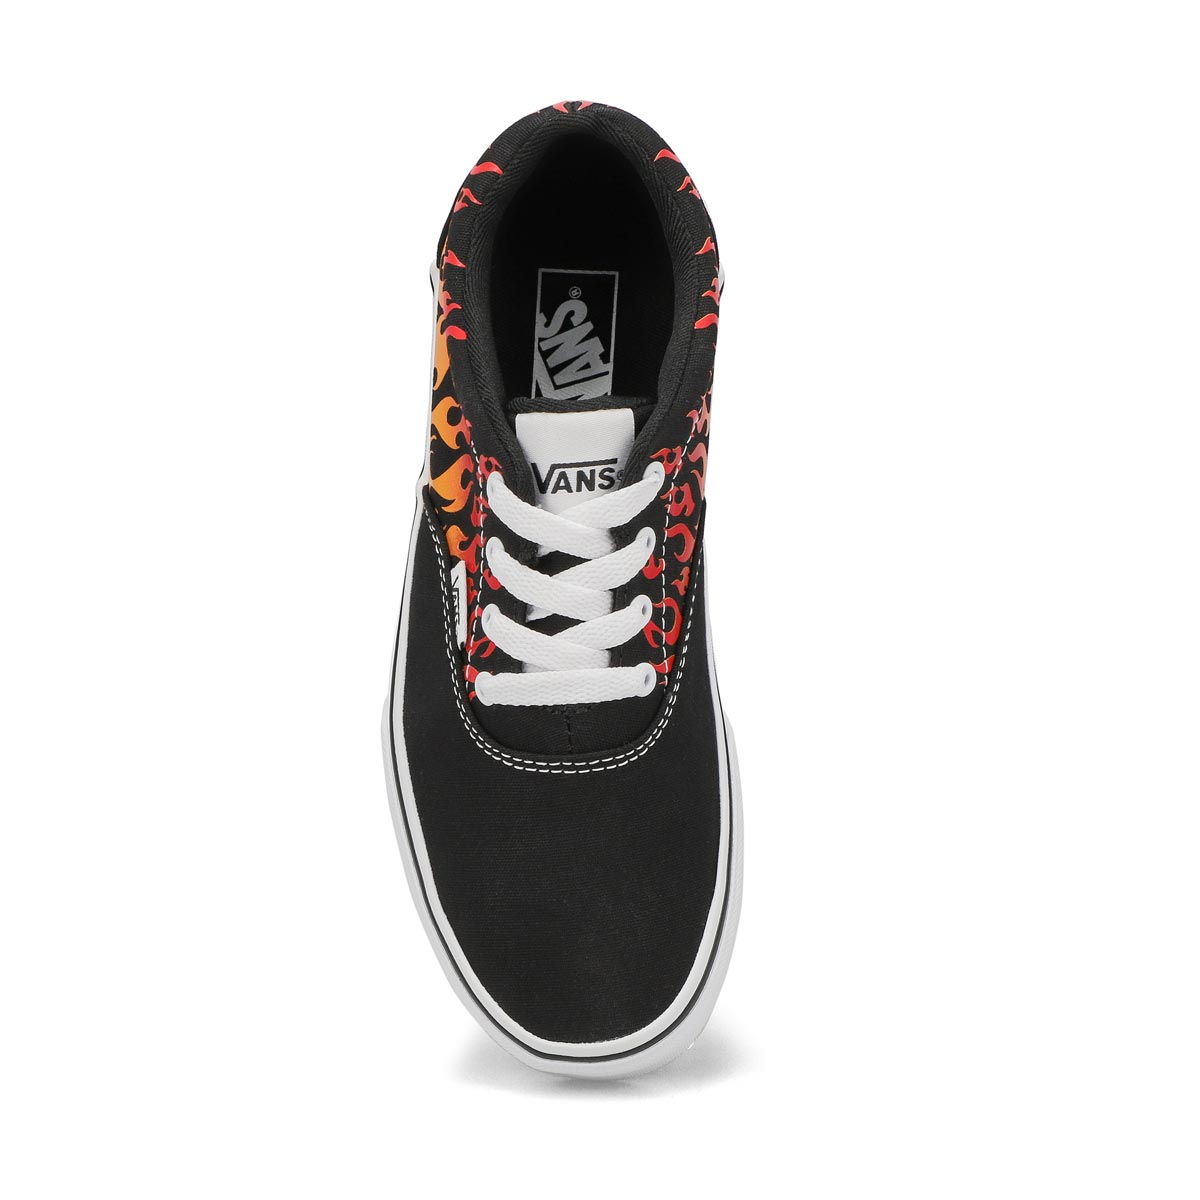 Boys' Doheny Flame Sneaker